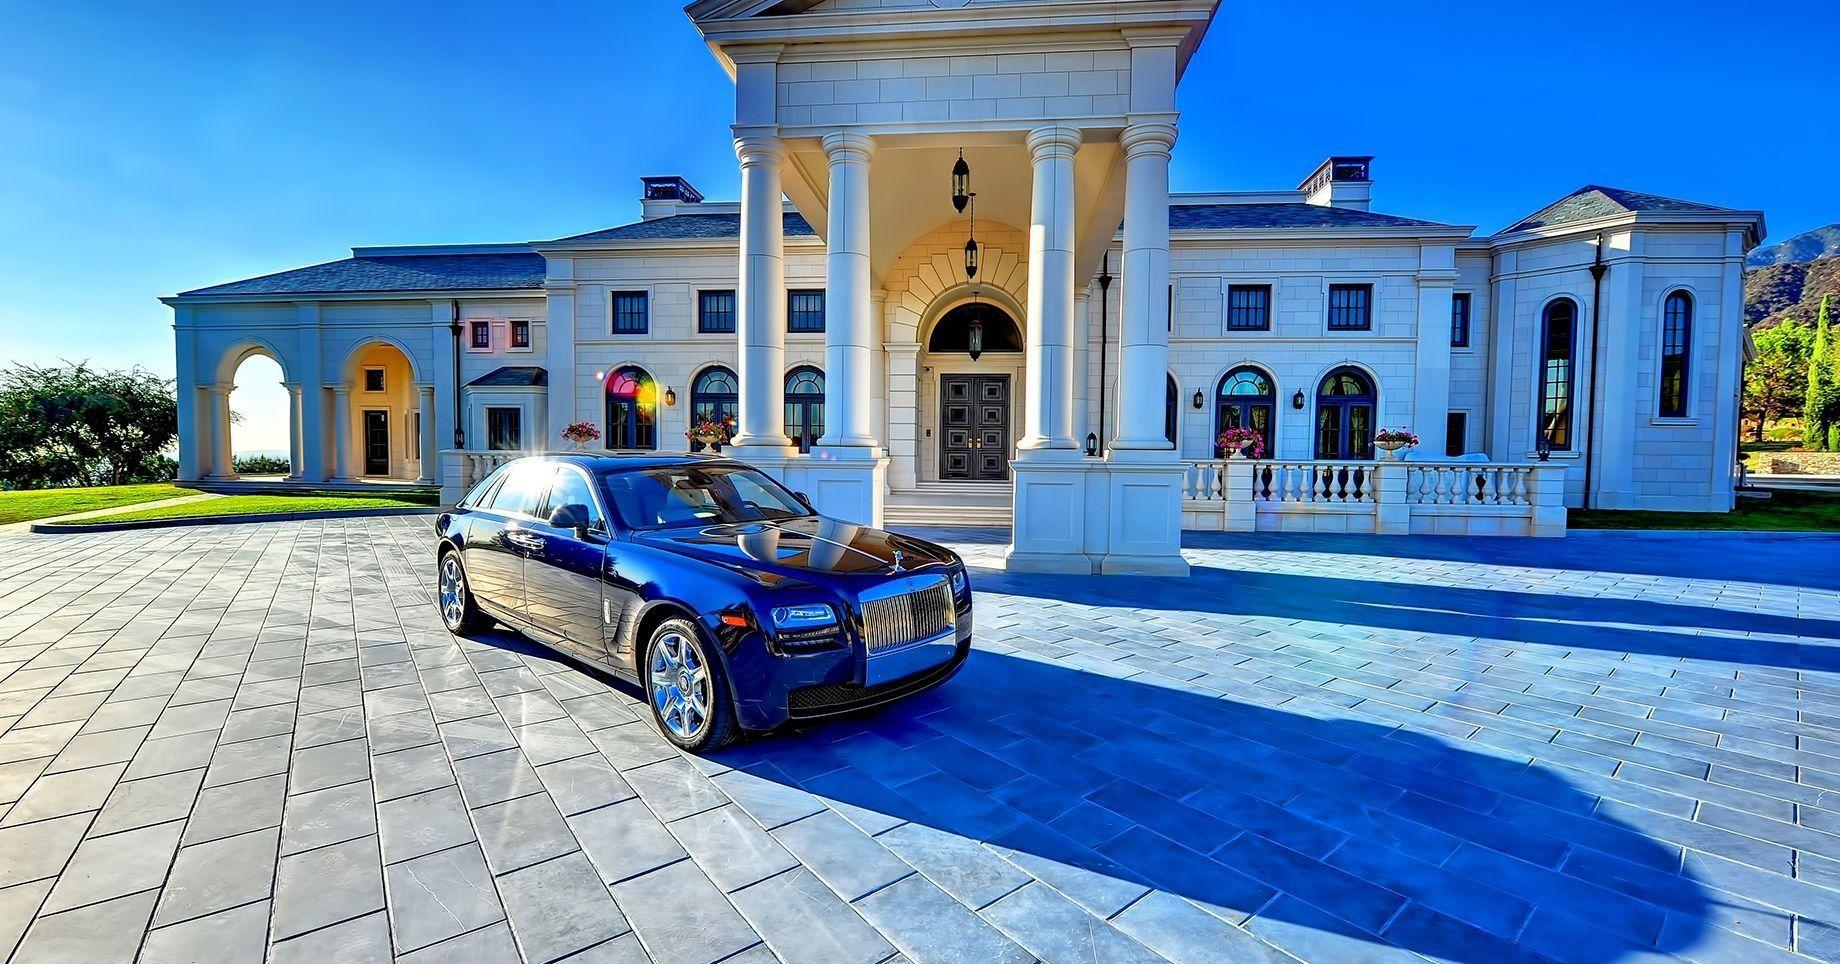 Mansion with Cars Wallpapers - Top Free Mansion with Cars Backgrounds